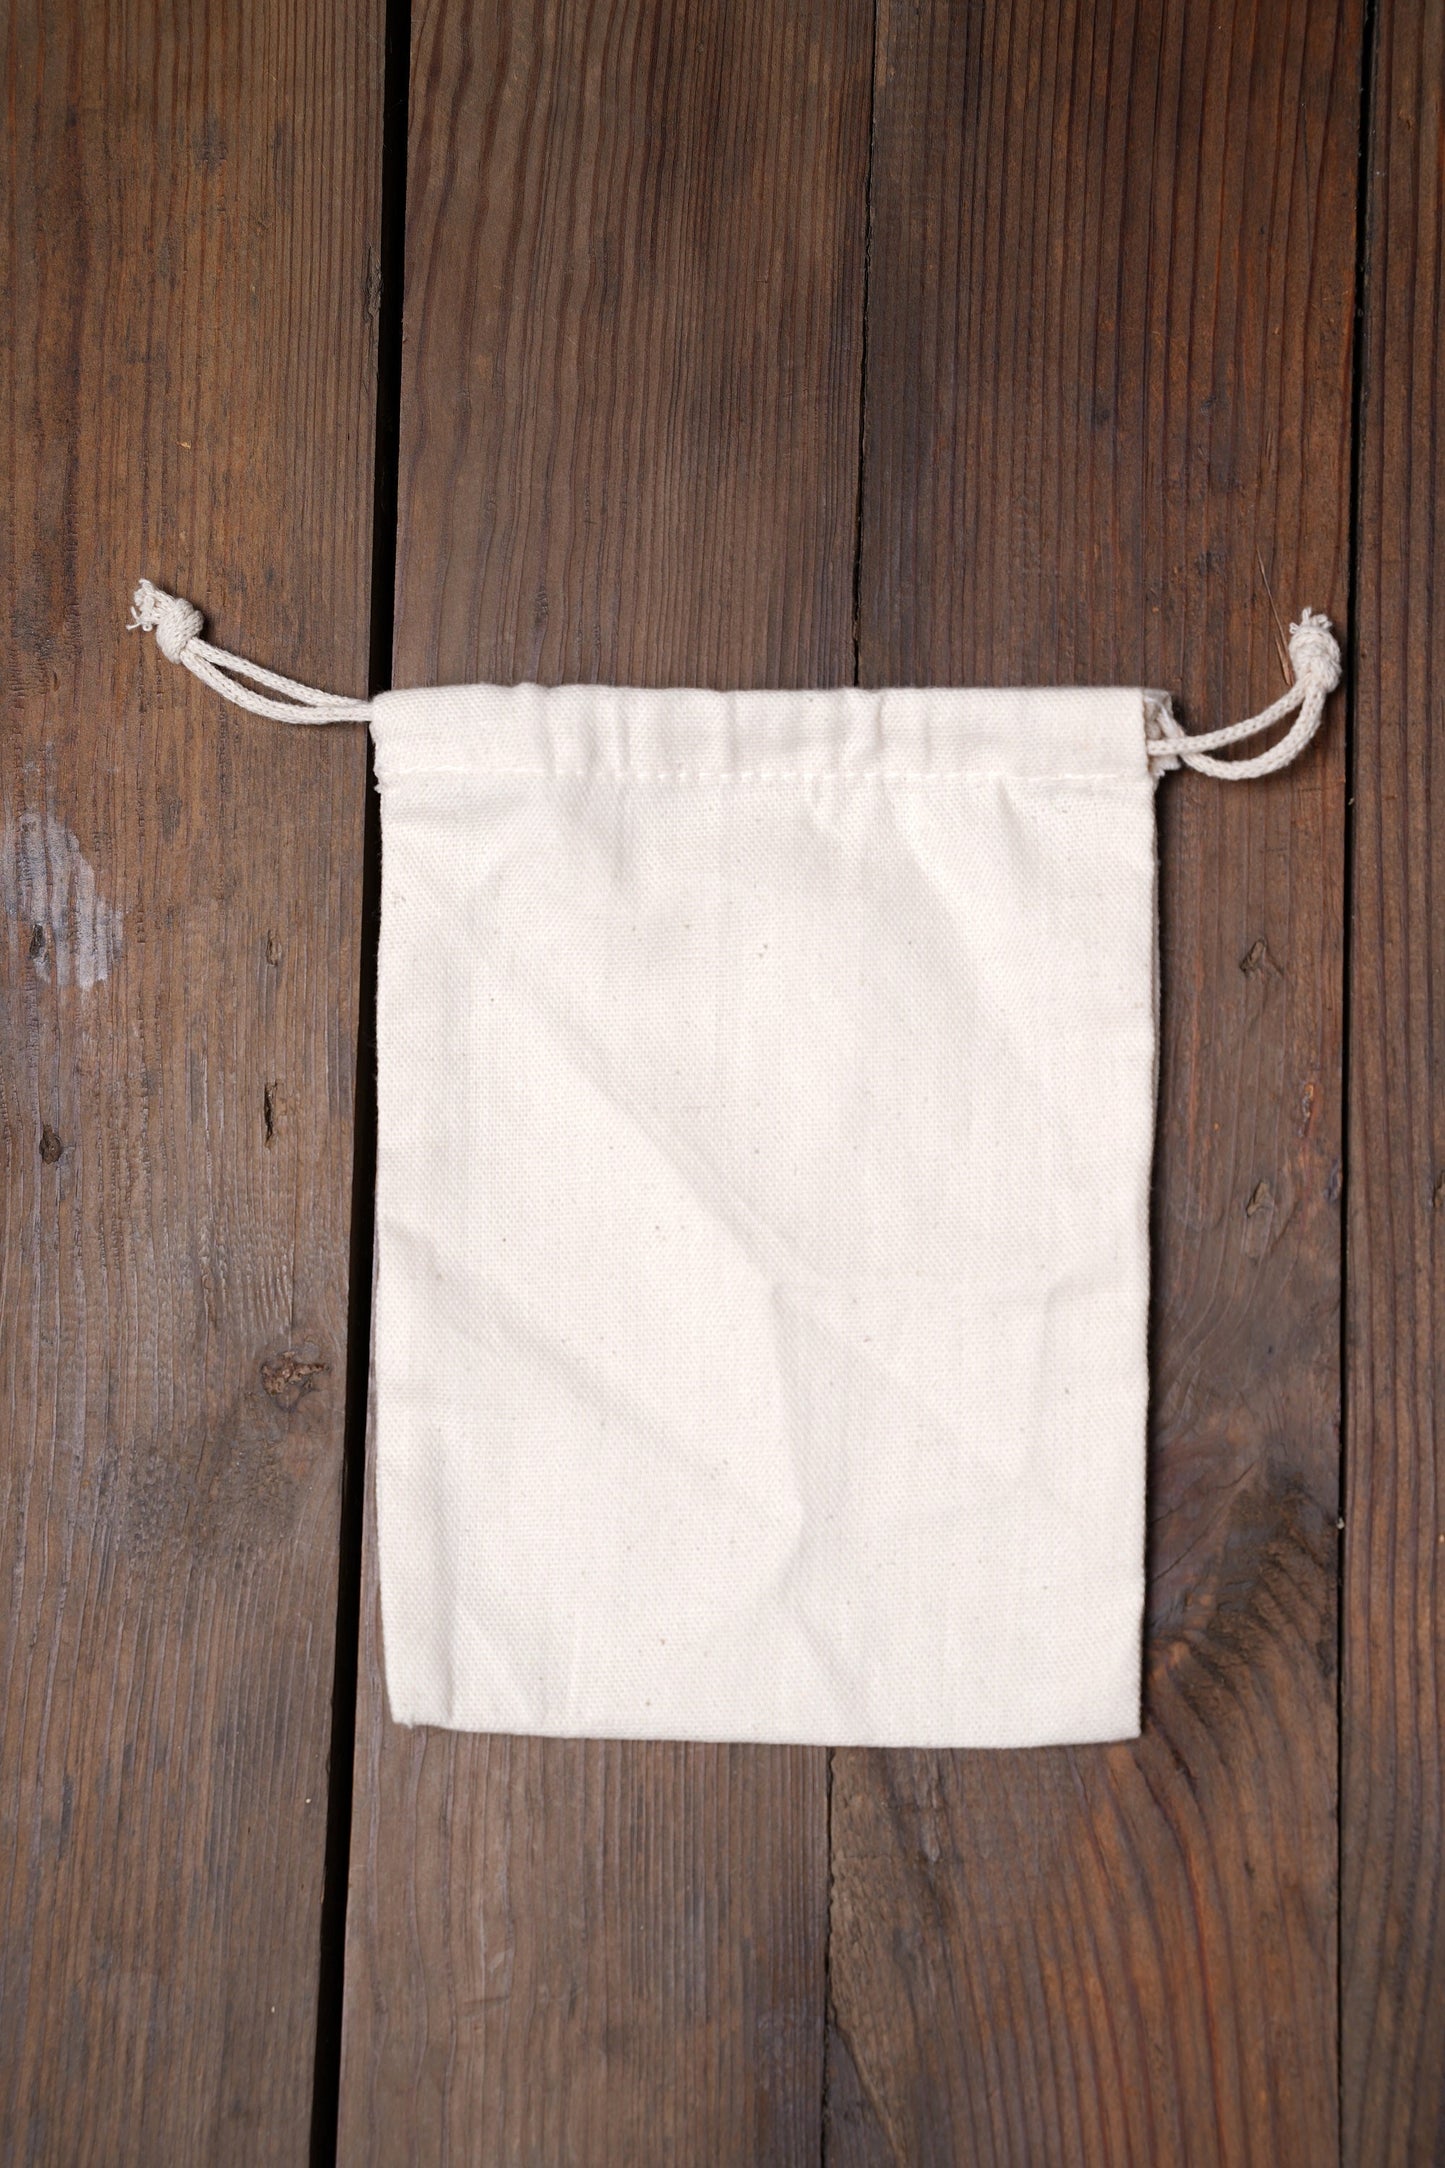 3x4 Inches Reusable Eco-Friendly Double Drawstring Cotton CANVAS Bags Natural Color